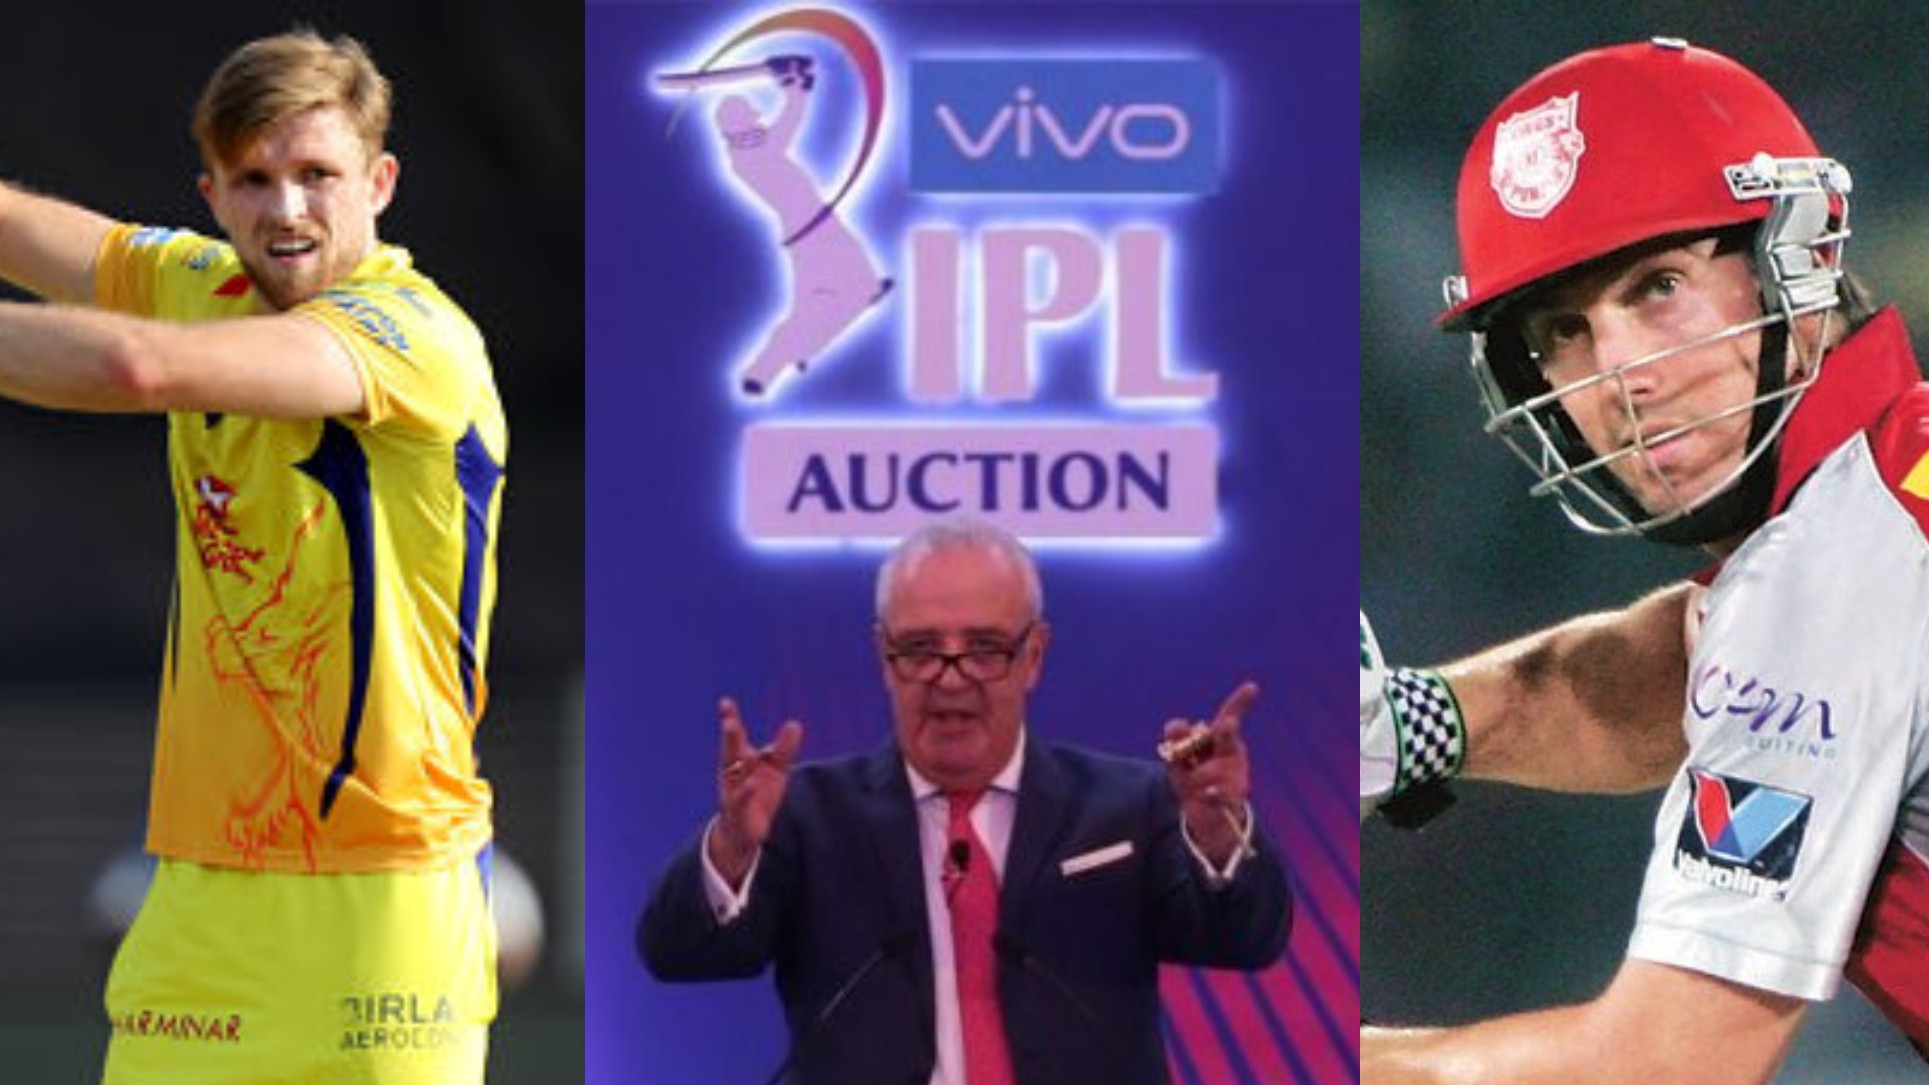 IPL Auction 2020: 5 Players with Maximum base price who might go unsold